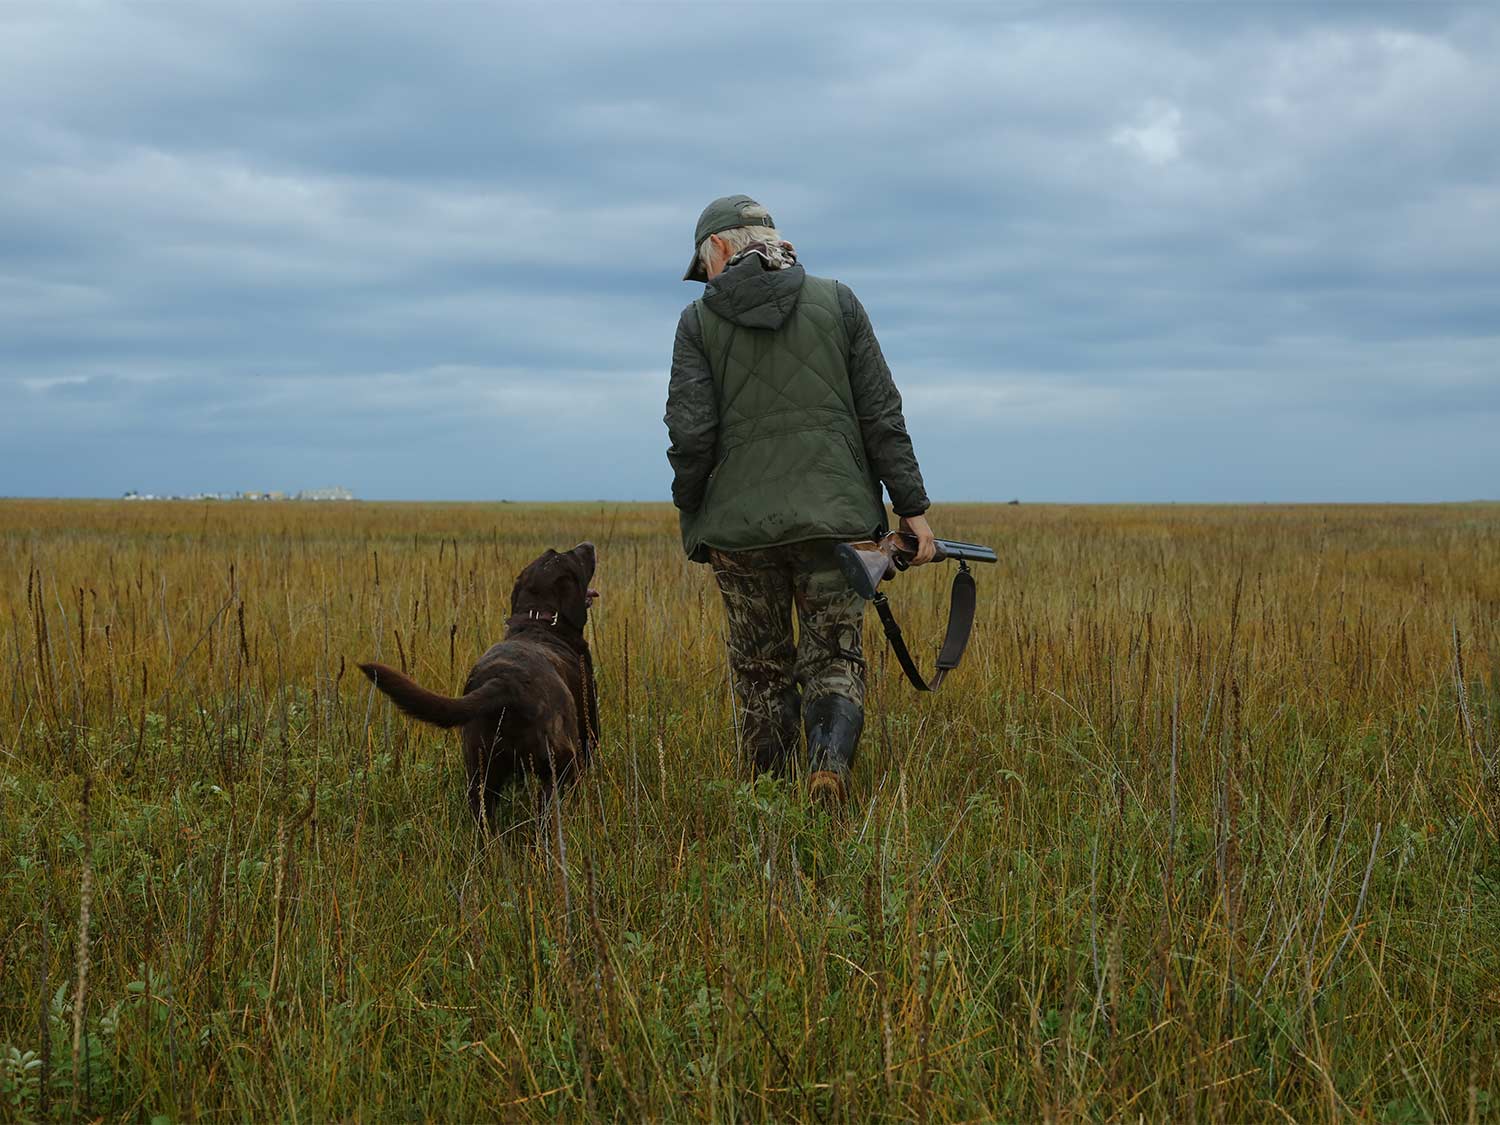 A hunter in camo and jacket holds a gun while walking through an open field. A hunting dog walks beside them.